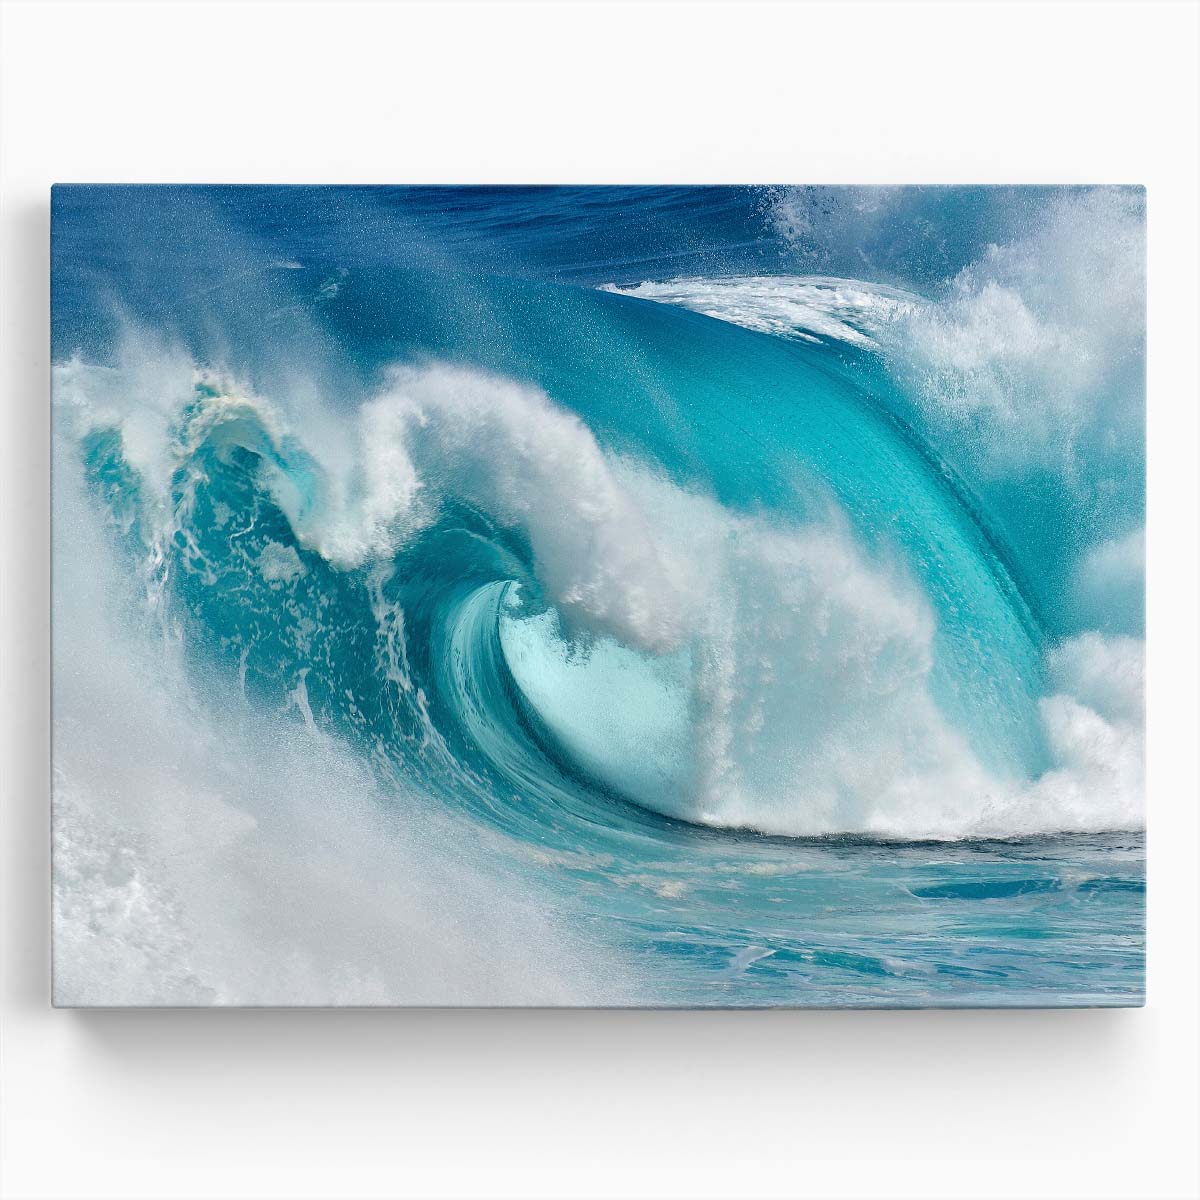 Turquoise Ocean Wave Splash Seascape Photography Wall Art by Luxuriance Designs. Made in USA.